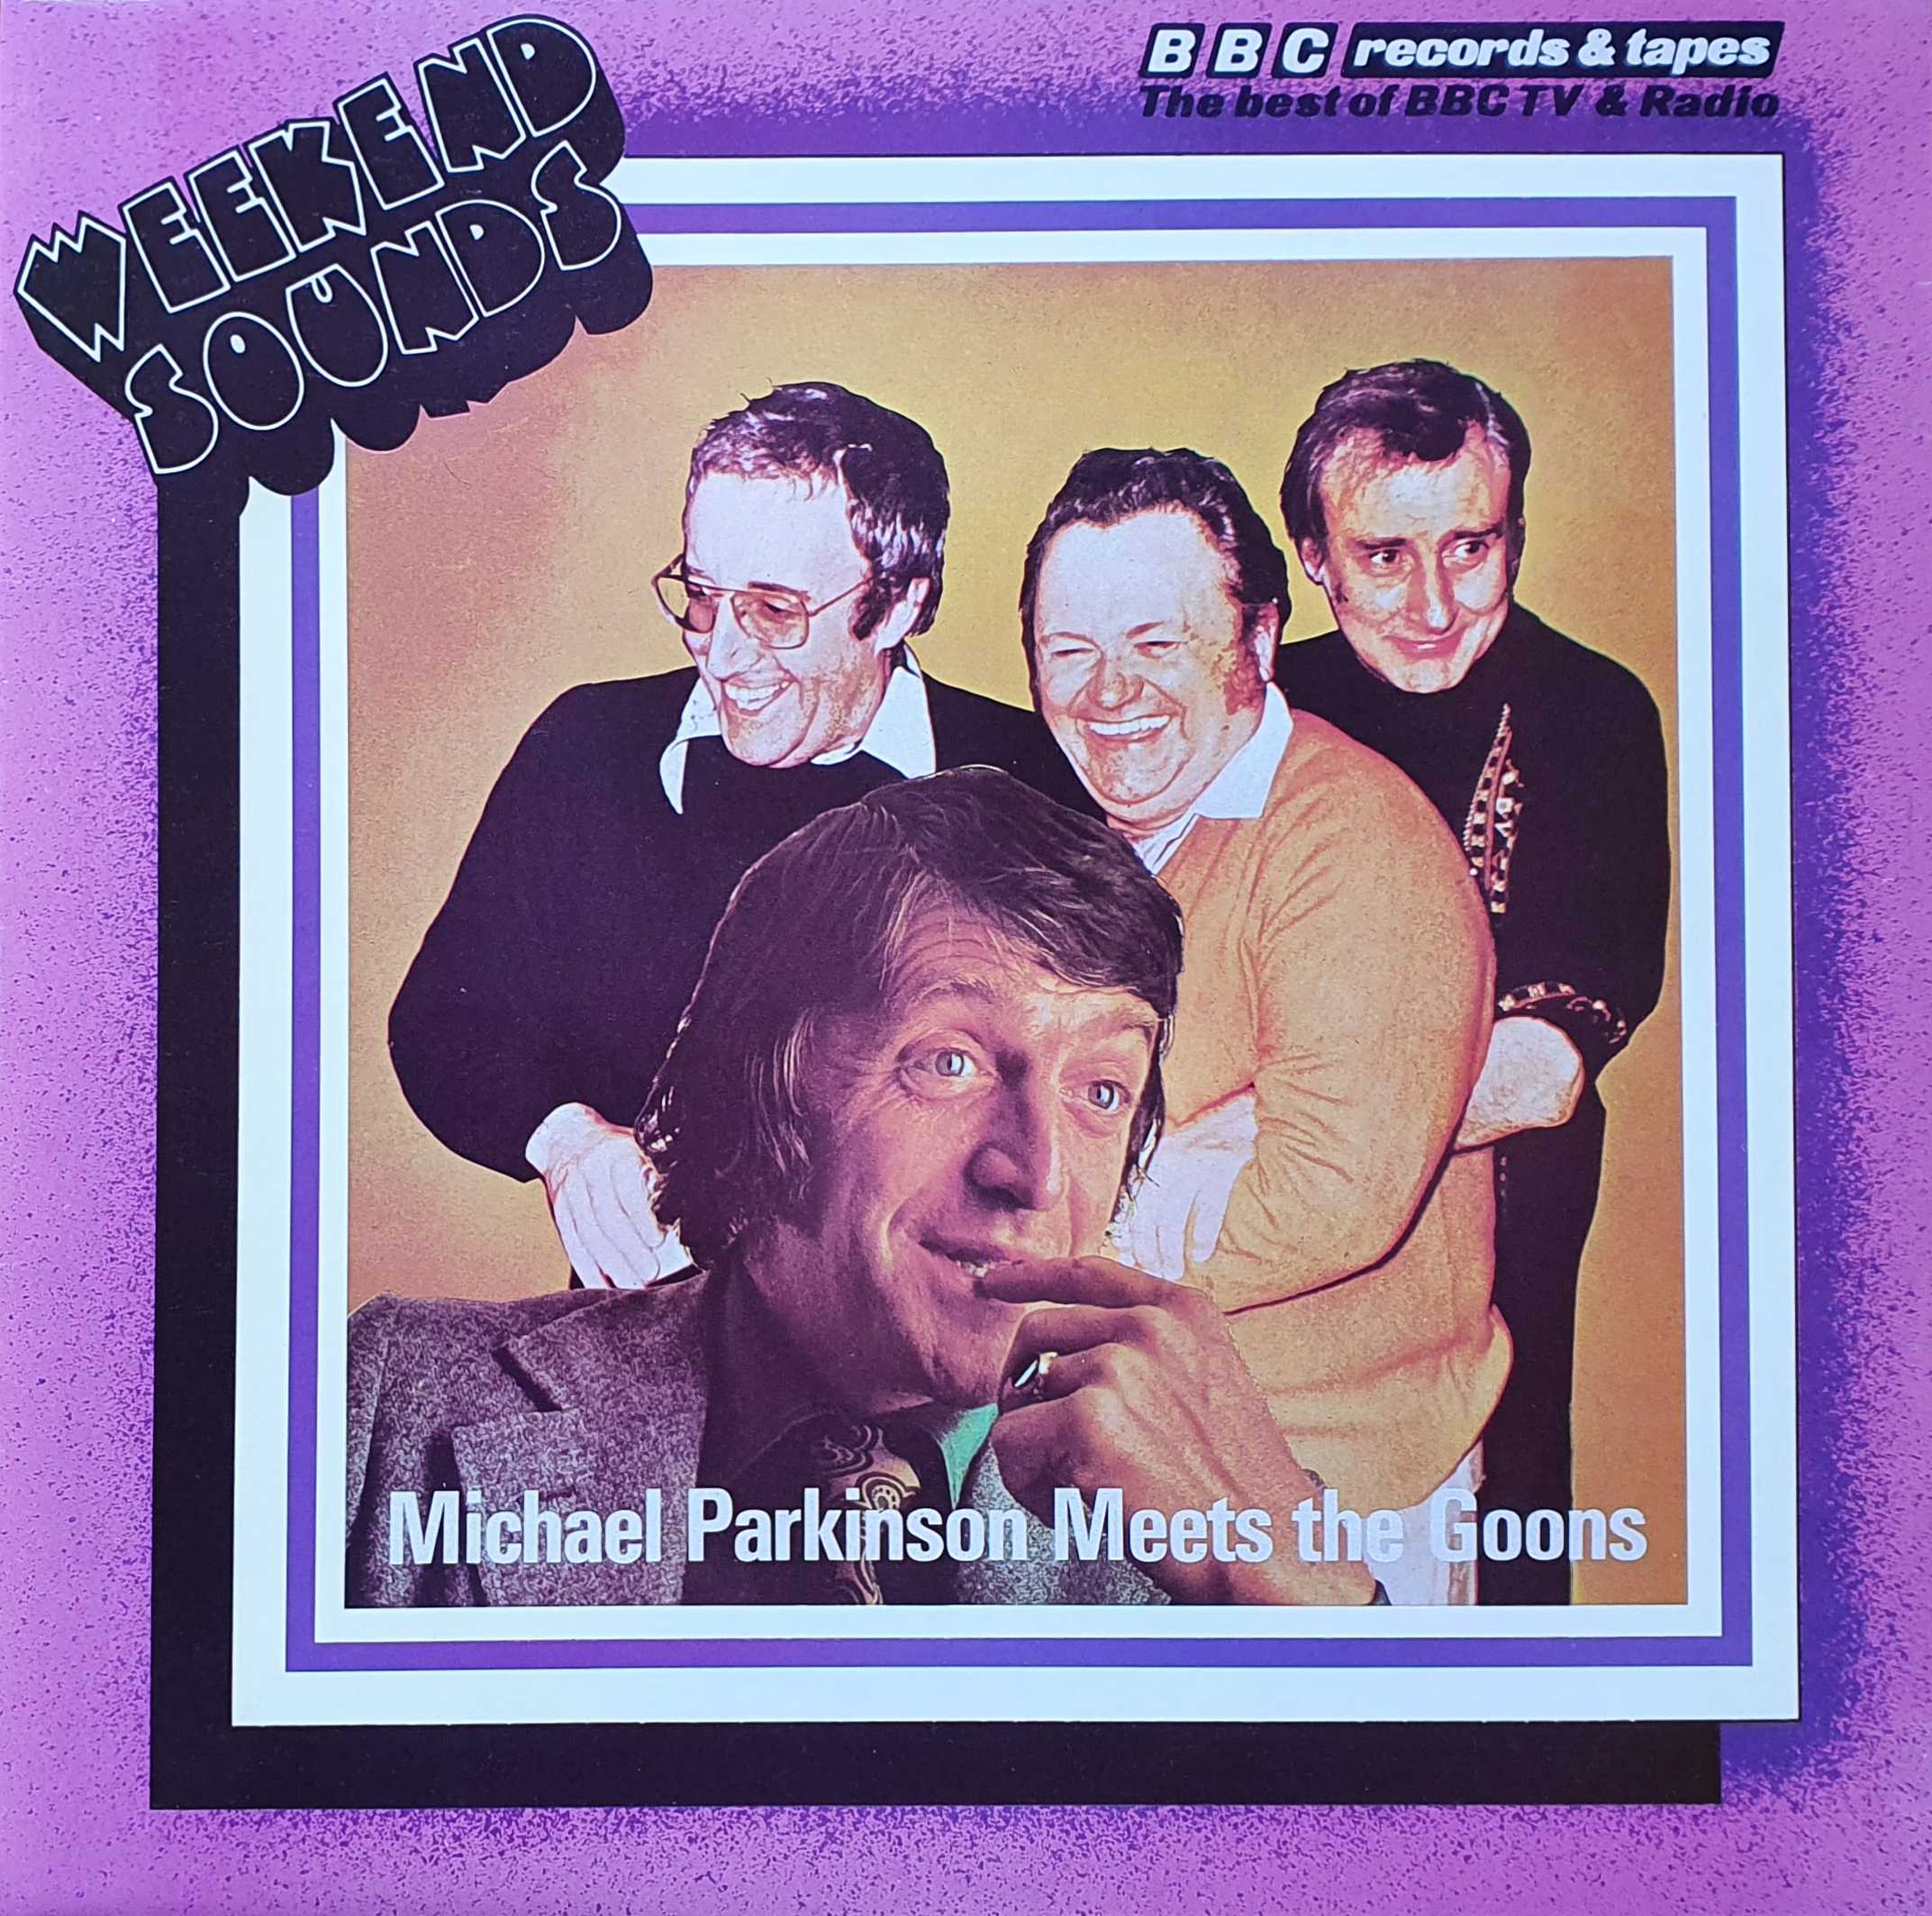 Picture of 821 494-1 Parkinson meets the Goons (Australian import) by artist Michael Parkinson from the BBC albums - Records and Tapes library